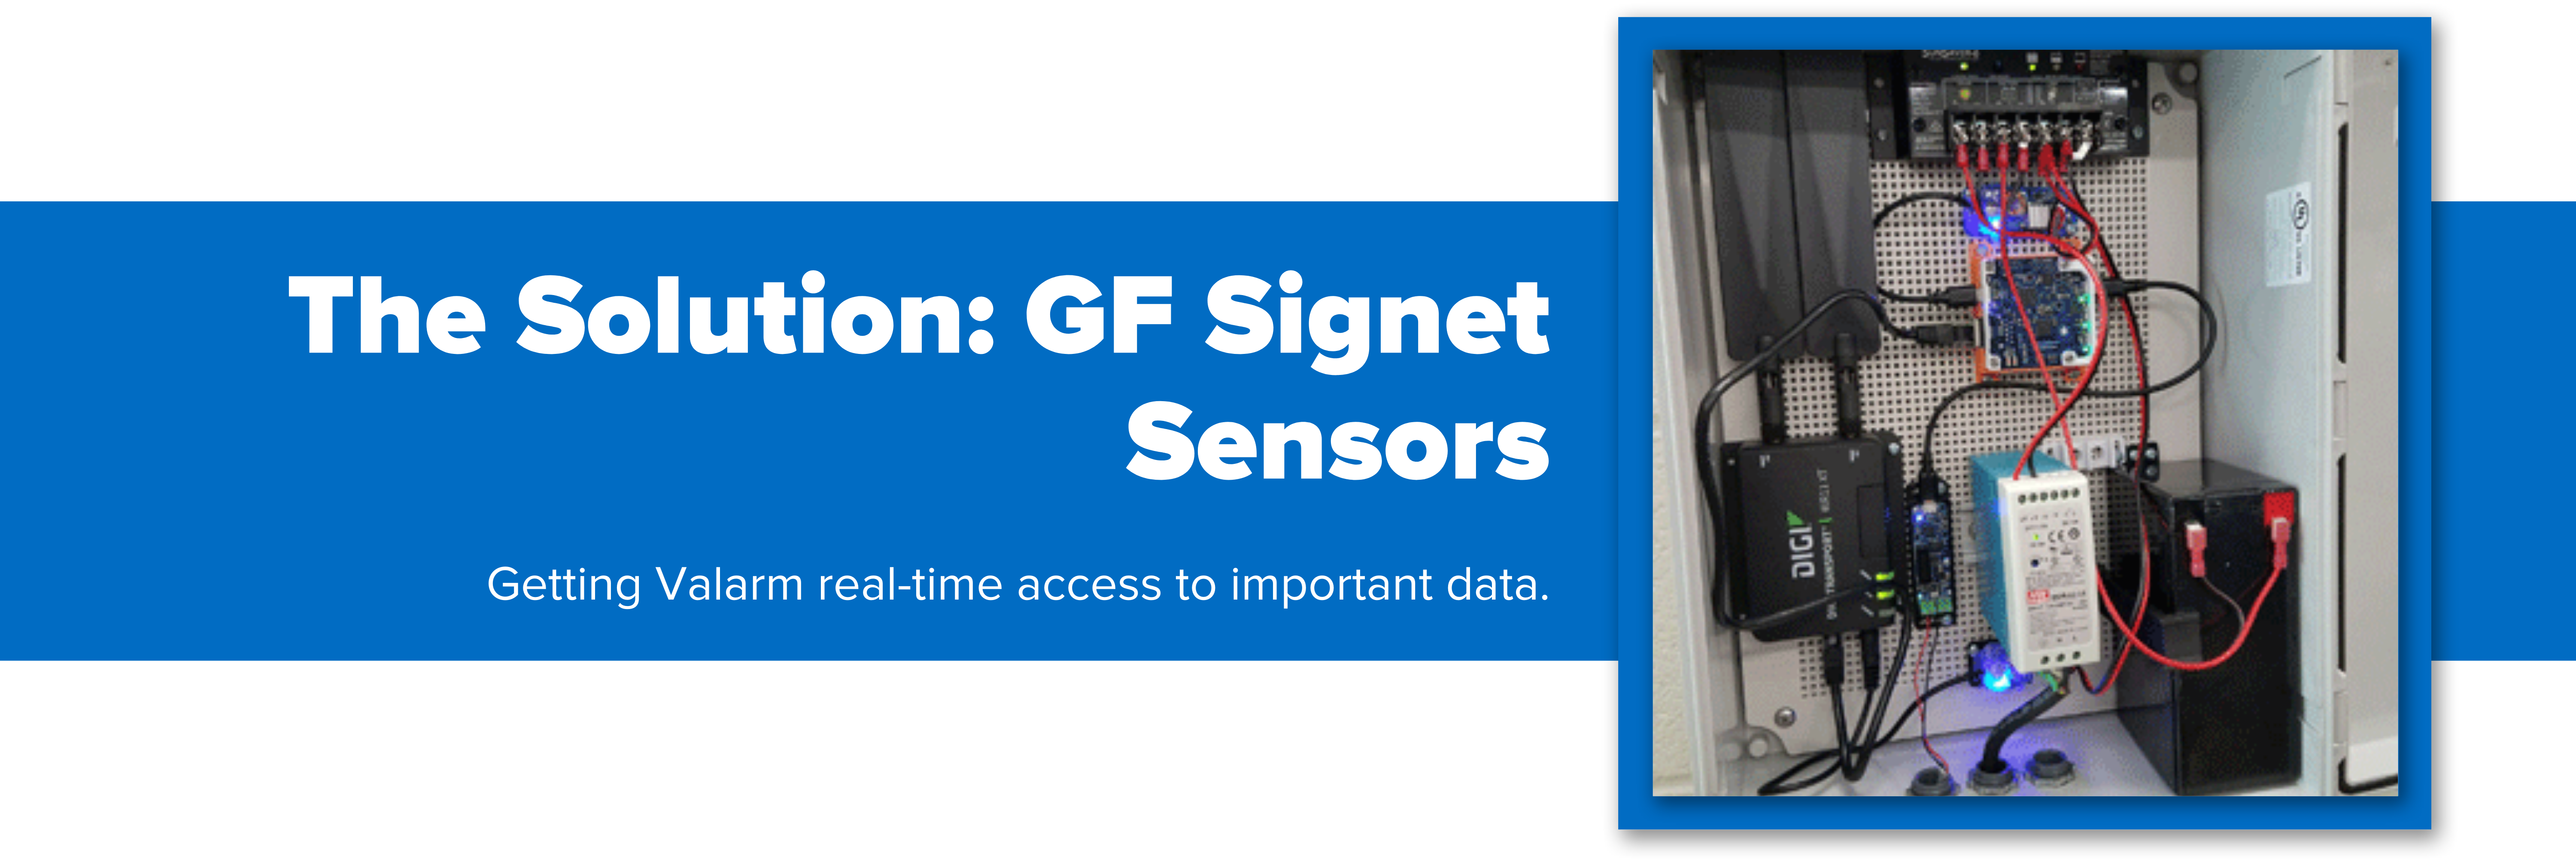 Header image with text "The Solution: GF Signet Sensors"